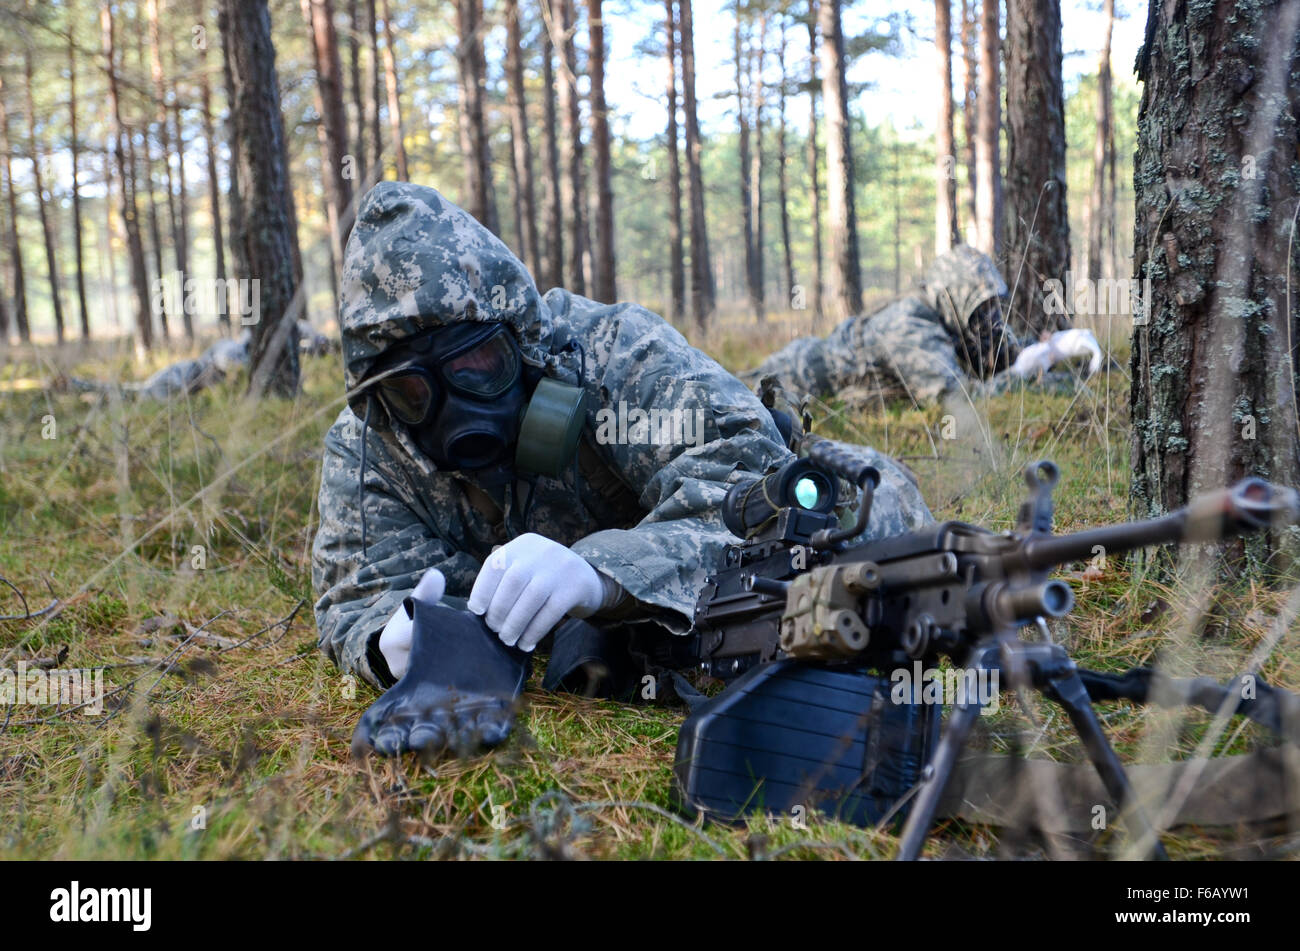 A Soldier with Attack Company 1-503rd Infantry Regiment (Abne), 173rd Airborne Brigade, Italy, don their gloves during a Chemical, Biological, Radiological, Nuclear training exercise in Latvia, Oct. 21, 2015, in support of Operation Atlantic Resolve. OAR provides U.S. Soldiers the opportunity to work with and train alongside our NATO allies, forge relationships that foster trust and mutual understanding, strengthen interoperability, and demonstrate the United States’ commitment to the NATO Alliance. Stock Photo